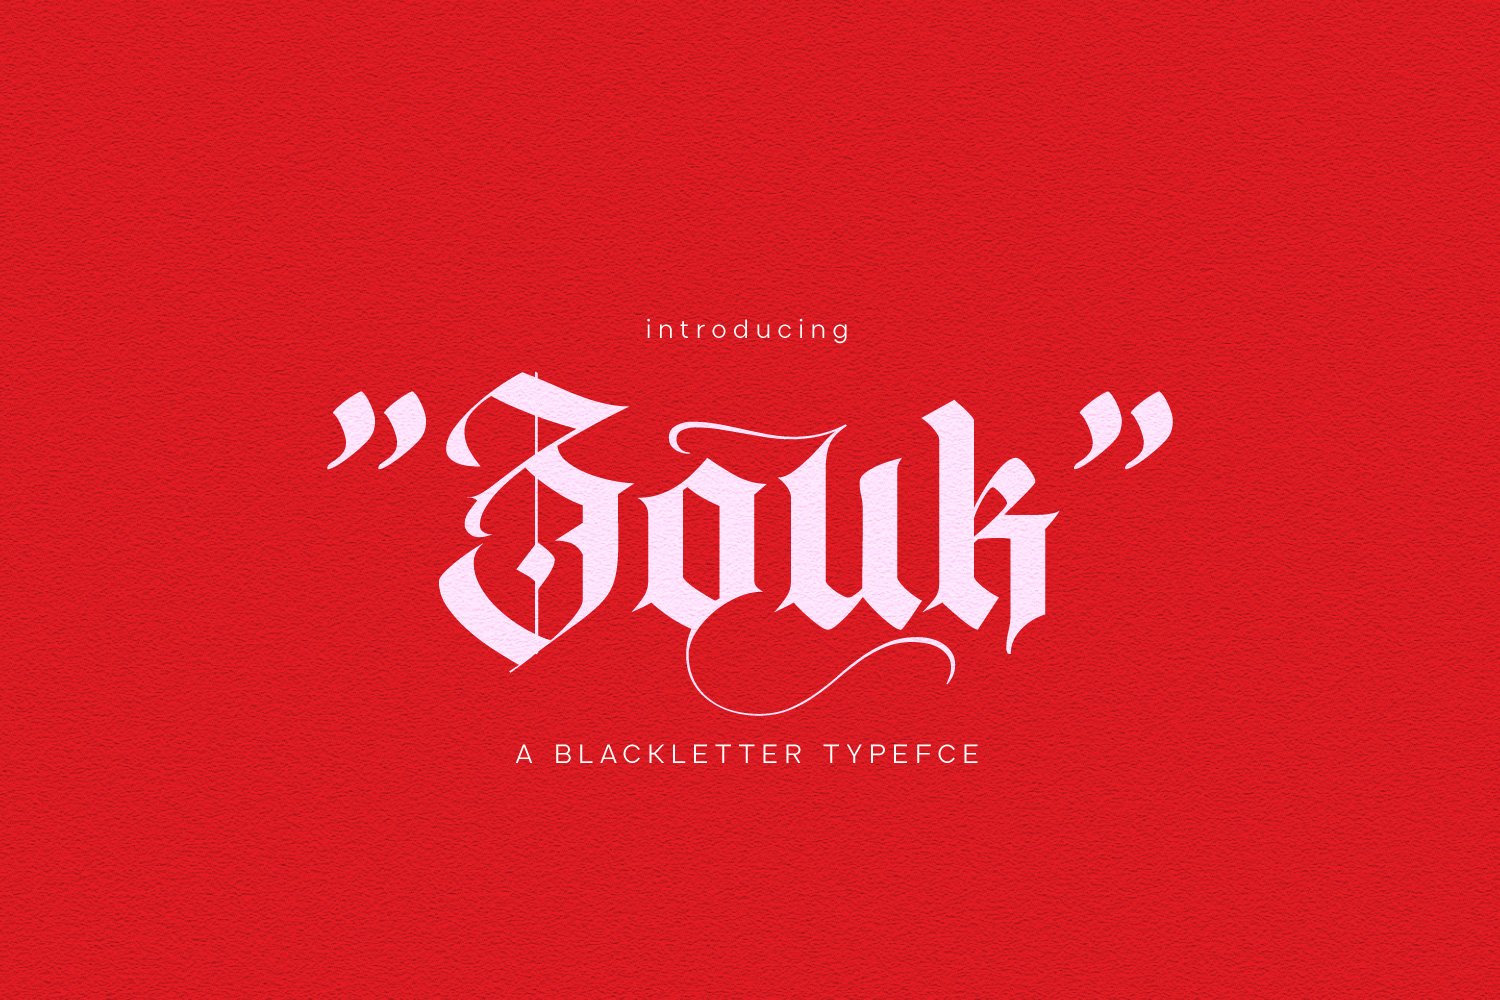 Zouk - Gothic Calligraphy cover image.